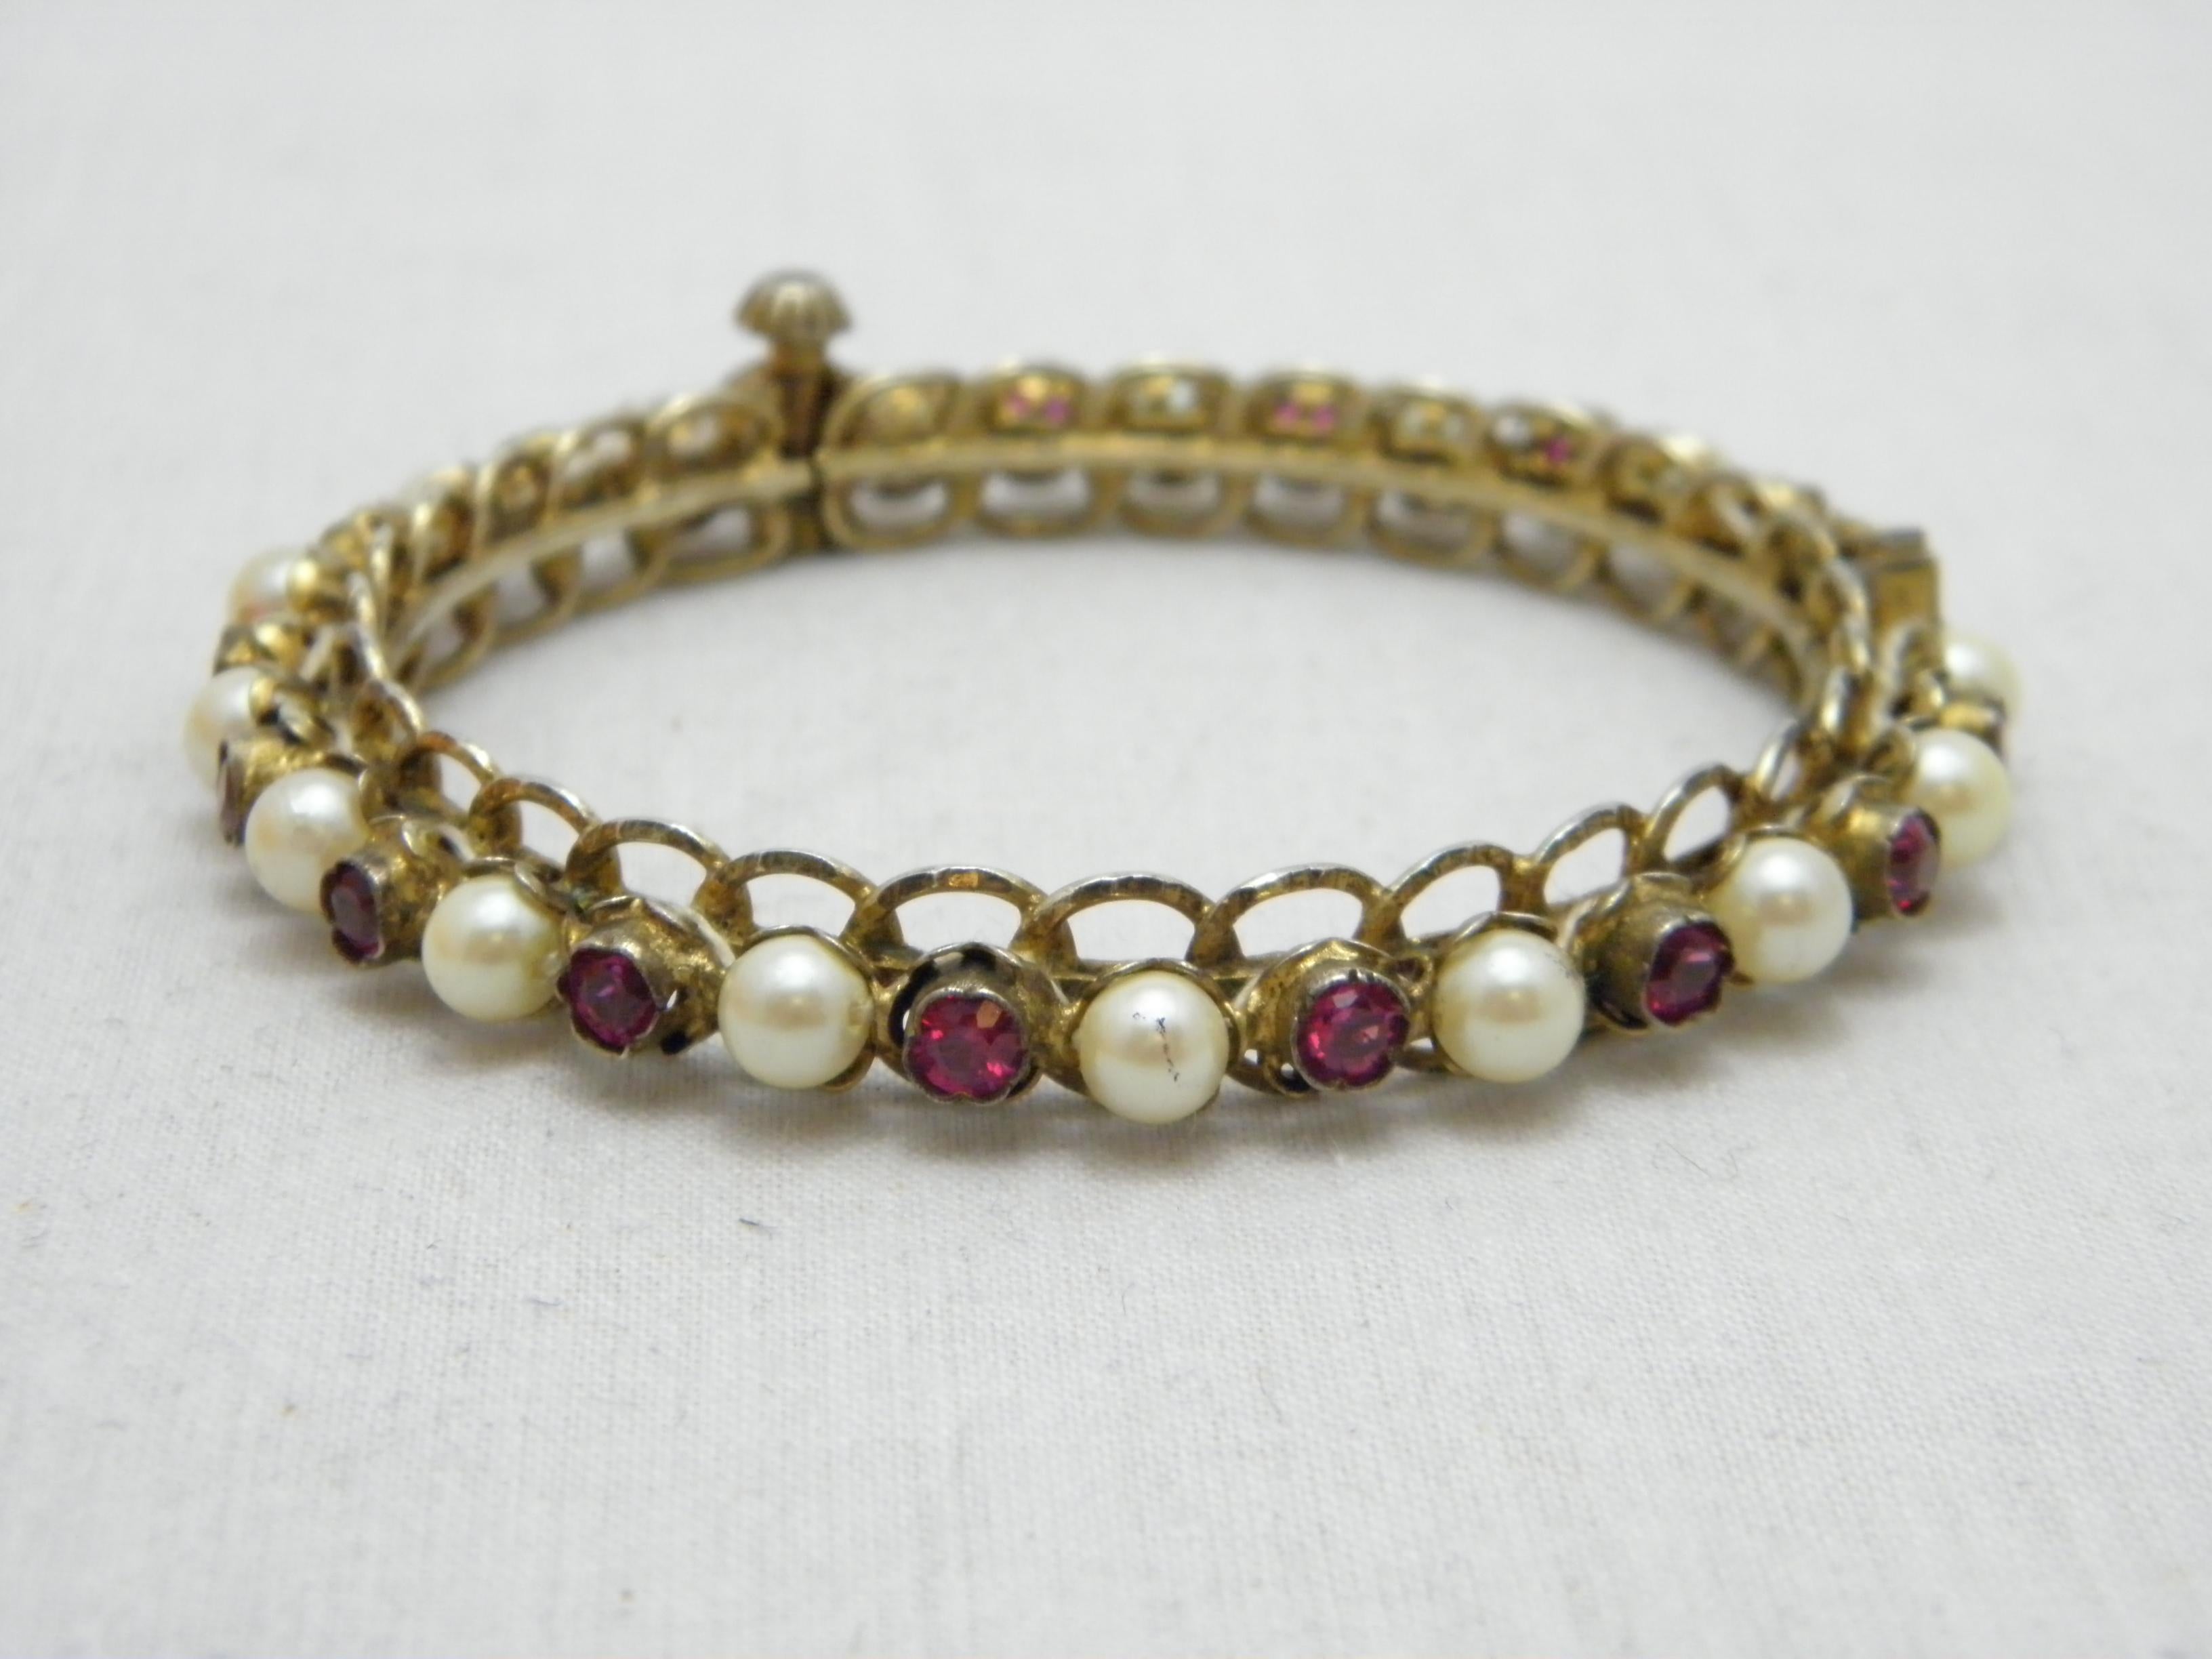 If you have landed on this page then you have an eye for beauty.

On offer is this gorgeous
9CT GOLD ROLLED RUBY AND PEARL PASTE HINGED BANGLE BRACELET

DETAILS
Material: Thick 9ct Rolled Gold (Rosey Yellow)
Style: Hinged Cuff with Ruby and Pearl